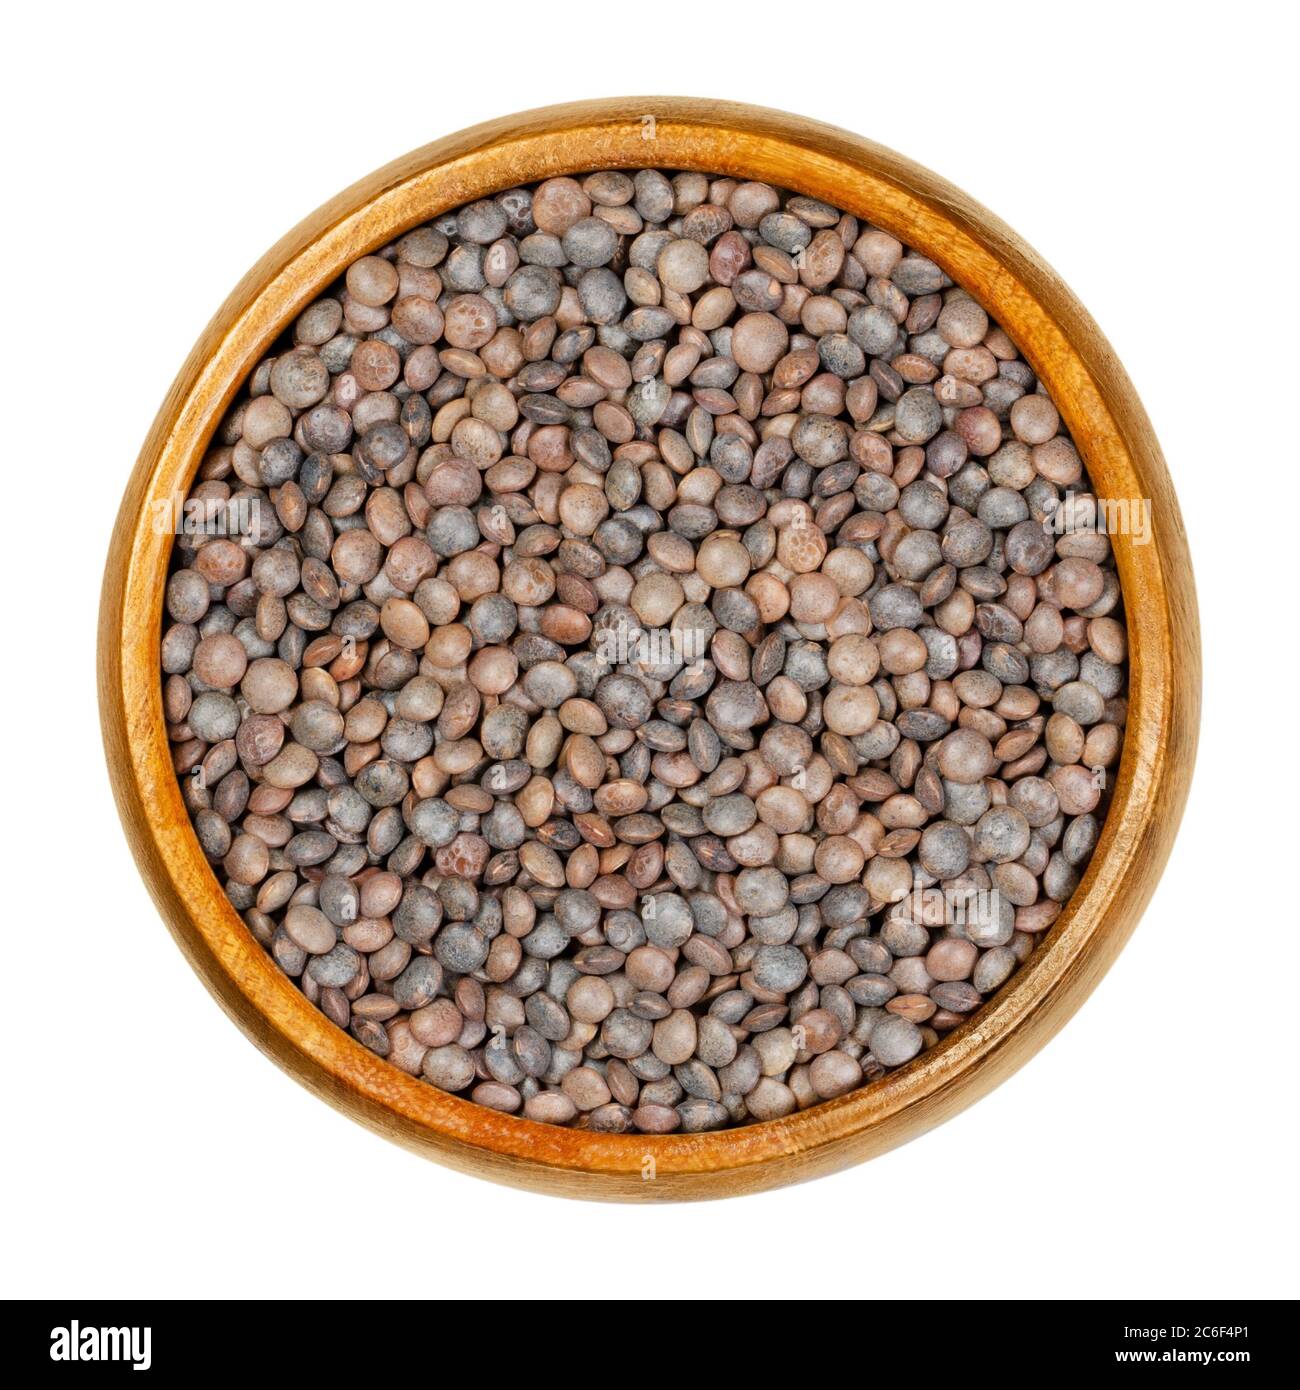 Unpeeled red lentils in wooden bowl. Dried seeds of Lens culinaris with their hulls, an edible legume, staple and a food crop. Closeup, from above. Stock Photo